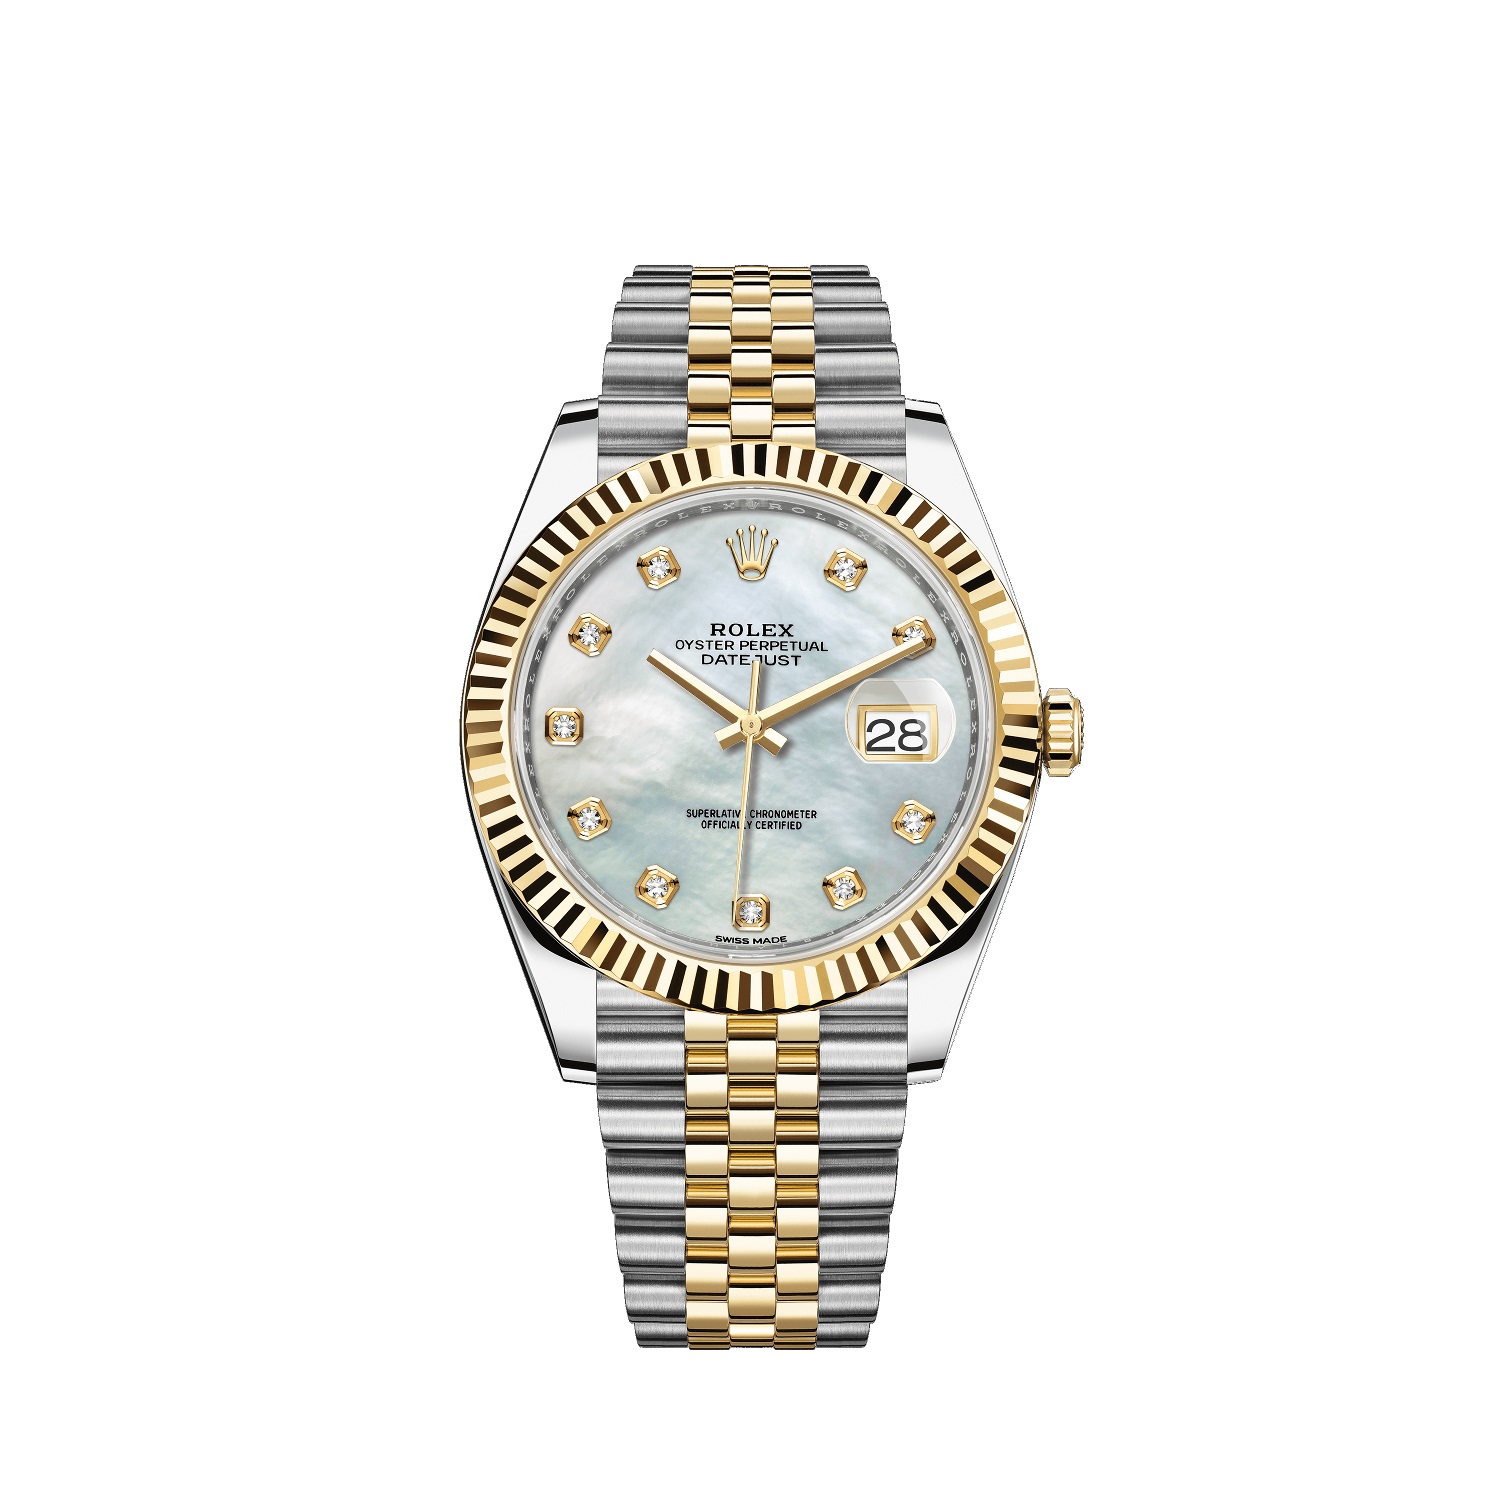 Datejust 41 126333 Gold & Stainless Steel Watch (White Mother-of-Pearl Set with Diamond)